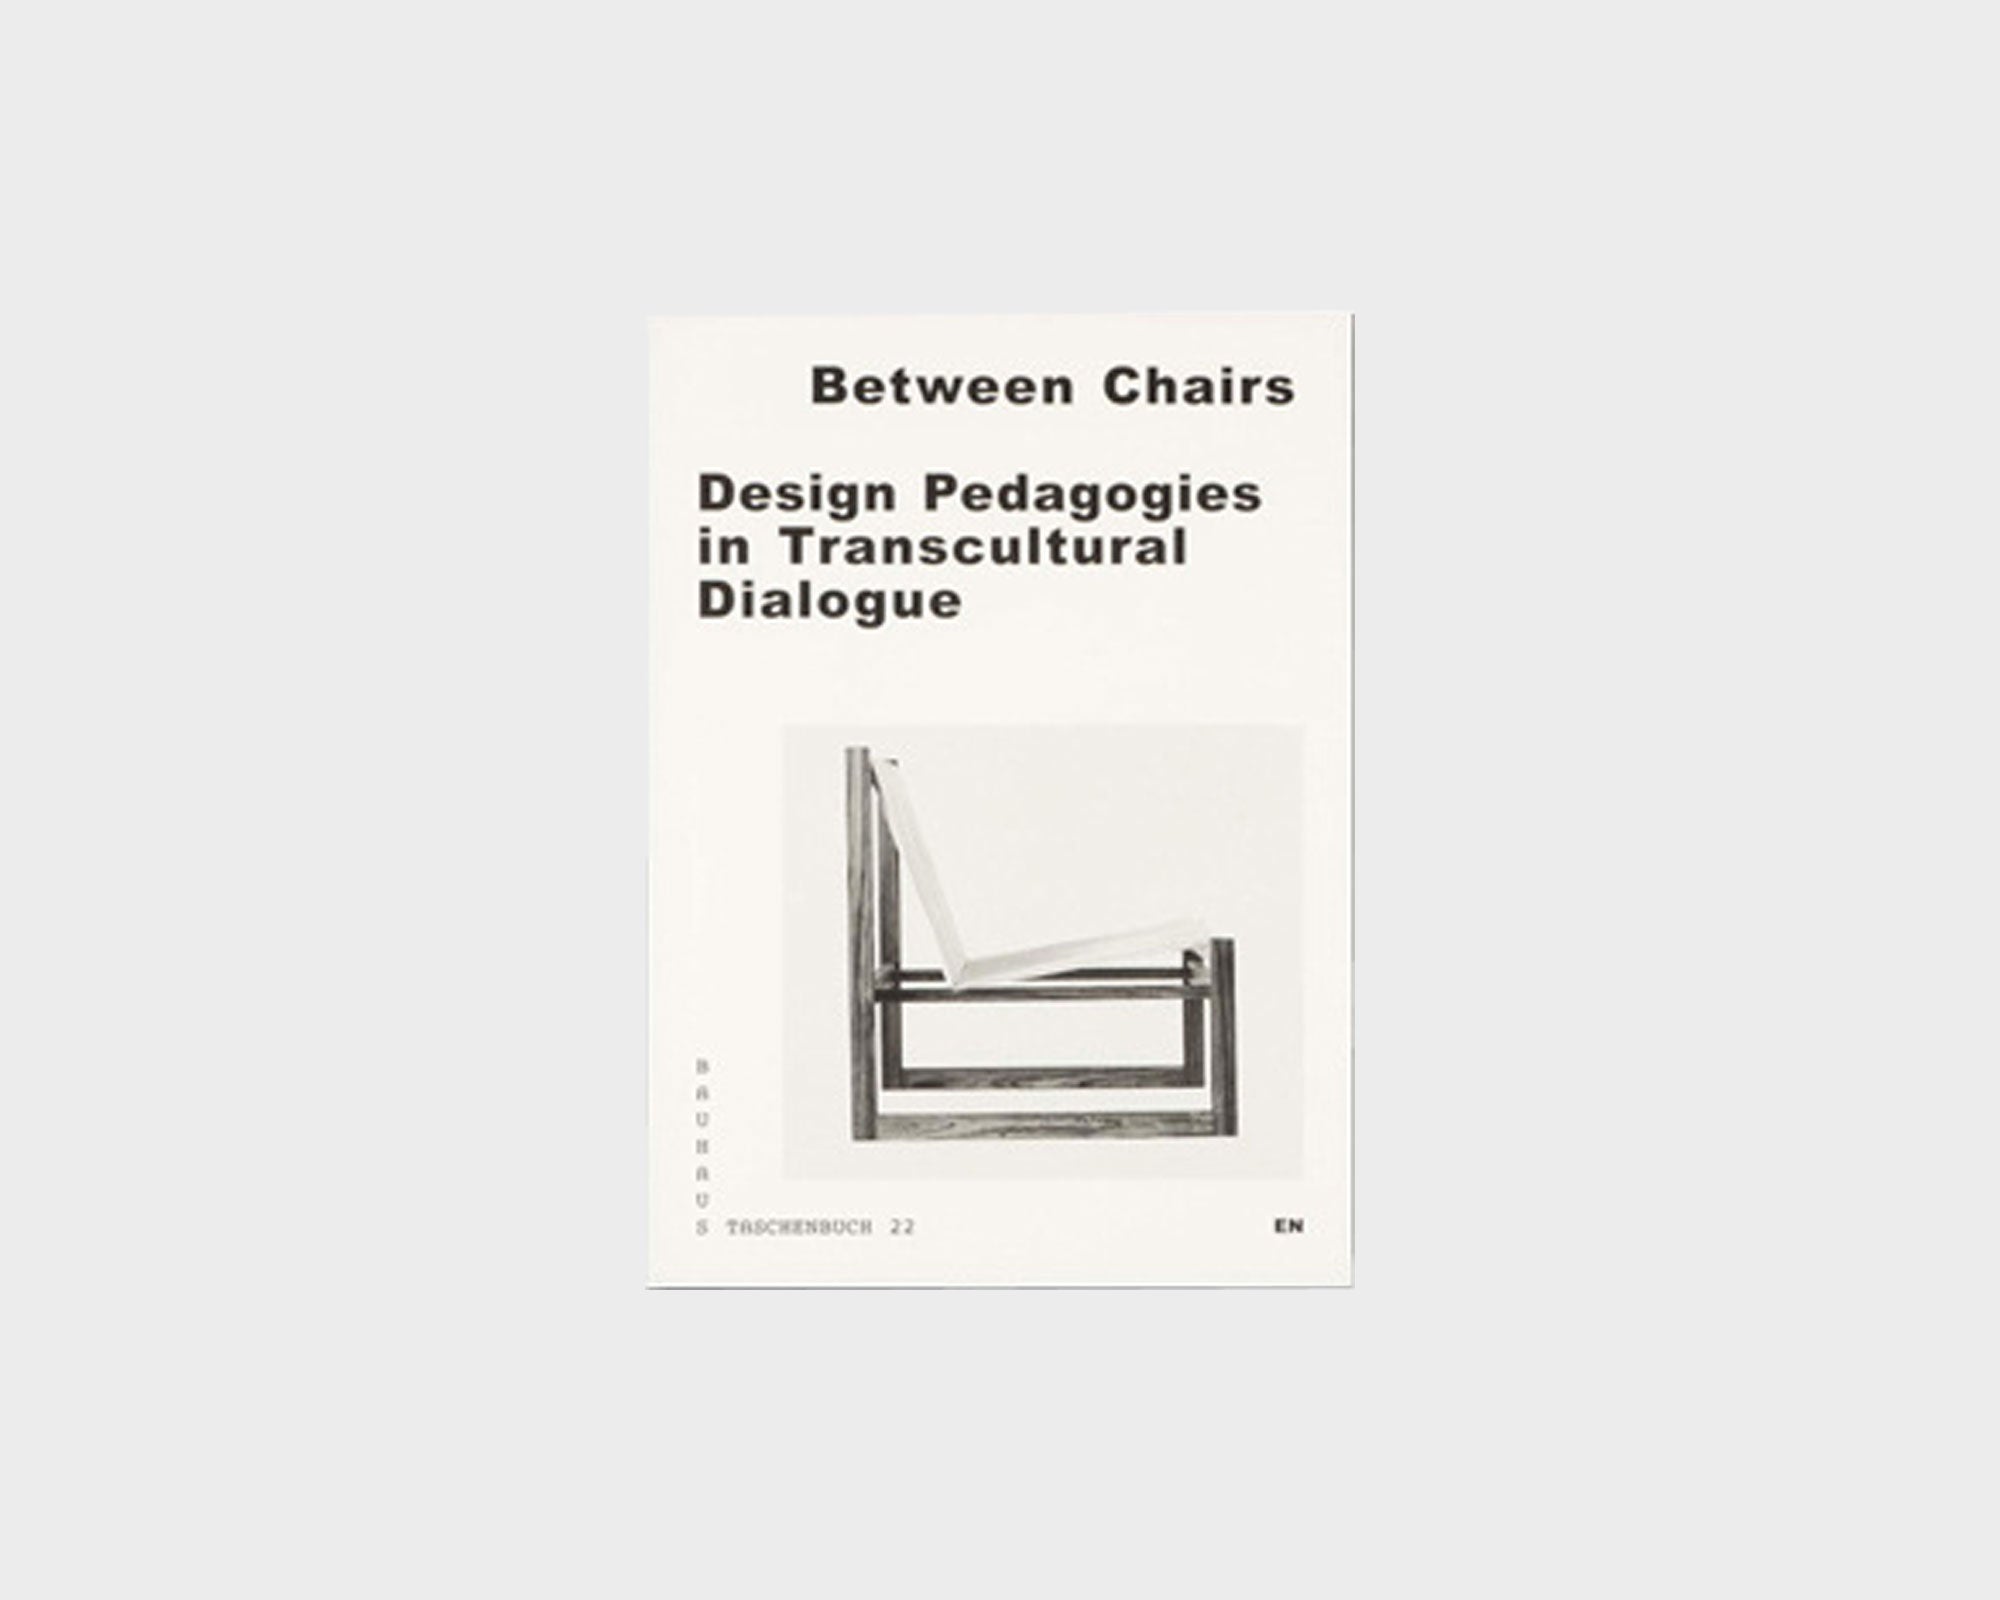 Between Chairs: Design Pedagogies in Transcultural Dialogue